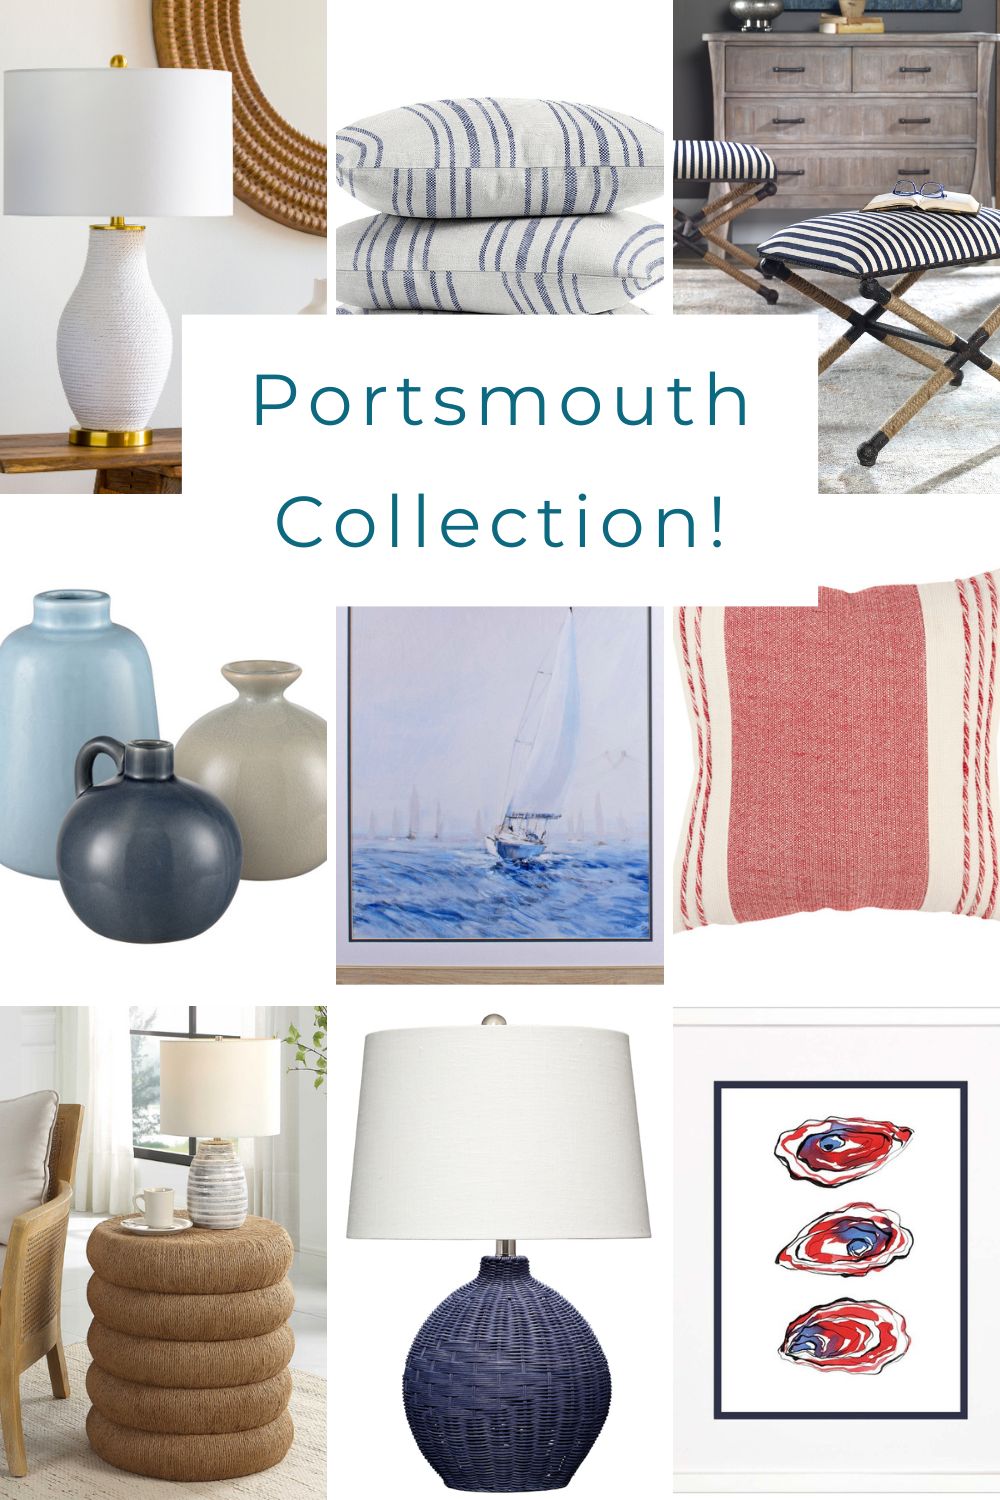 Introducing the Portsmouth Collection